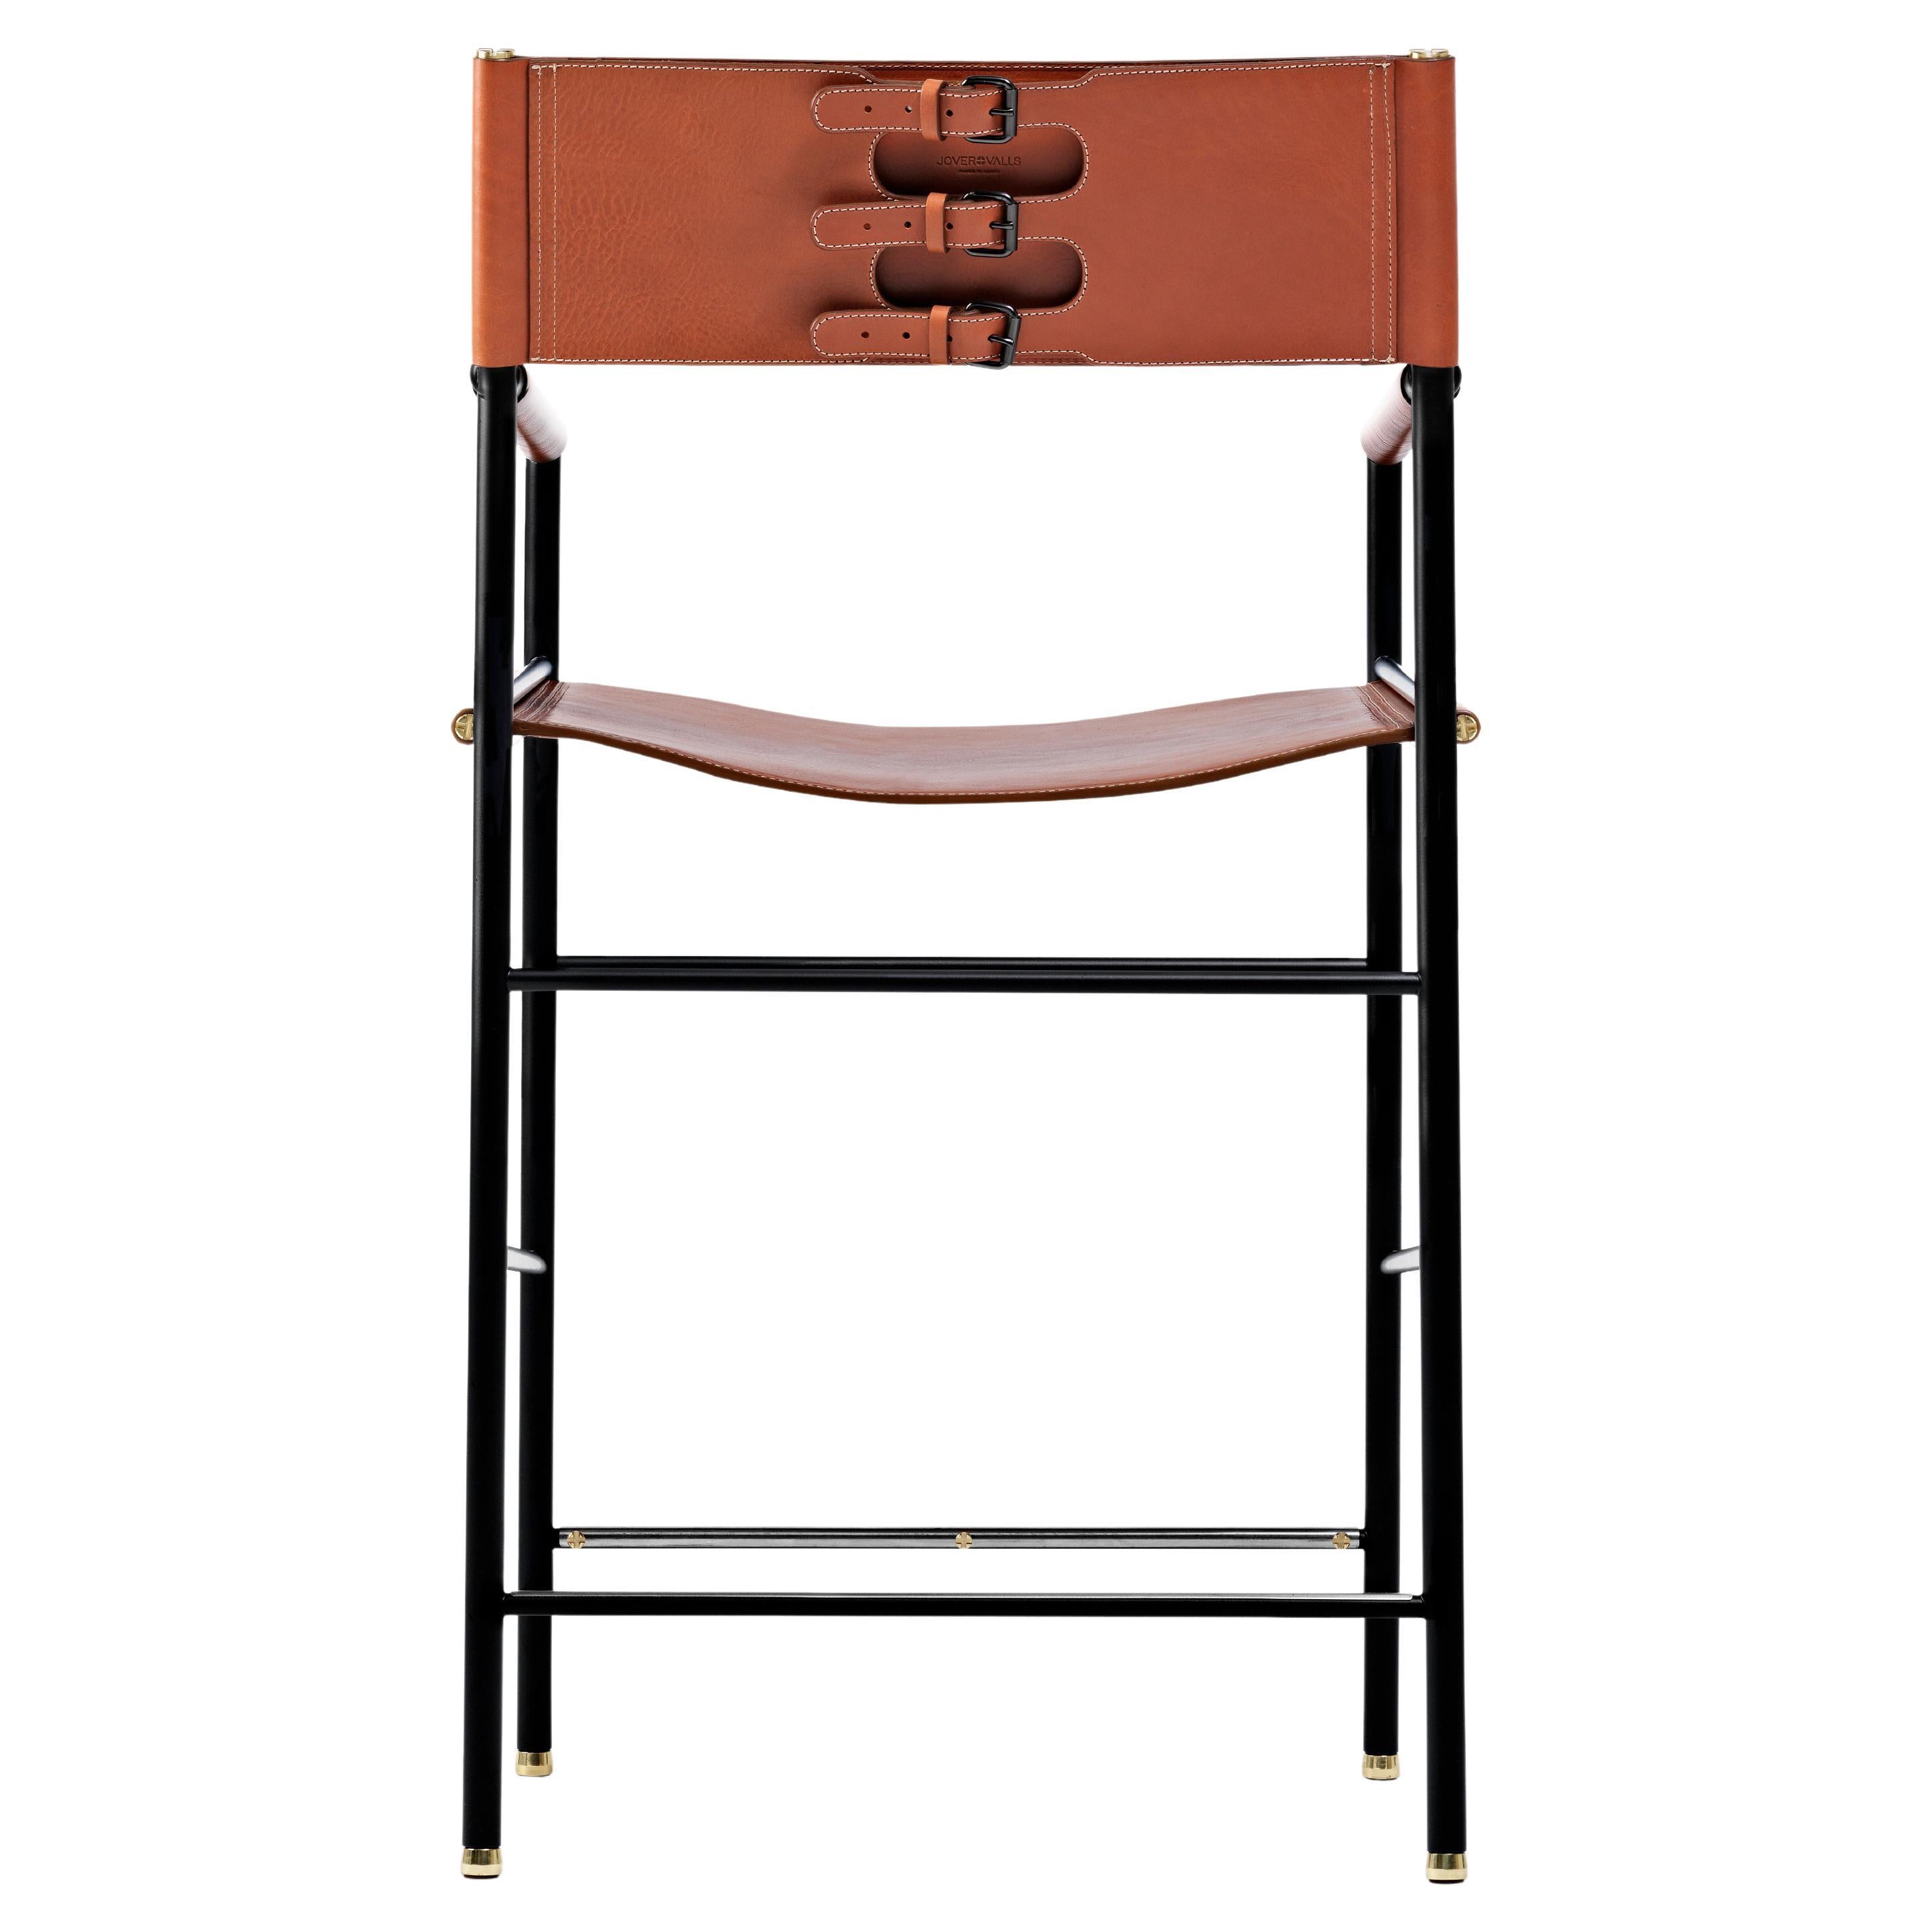 The “Repose” contemporary counter height stool belongs to a collection that revisit the director chair collection, serene pieces where exclusivity and precision are shown in small details such as the hand-turned metal nuts and bolts that fix the